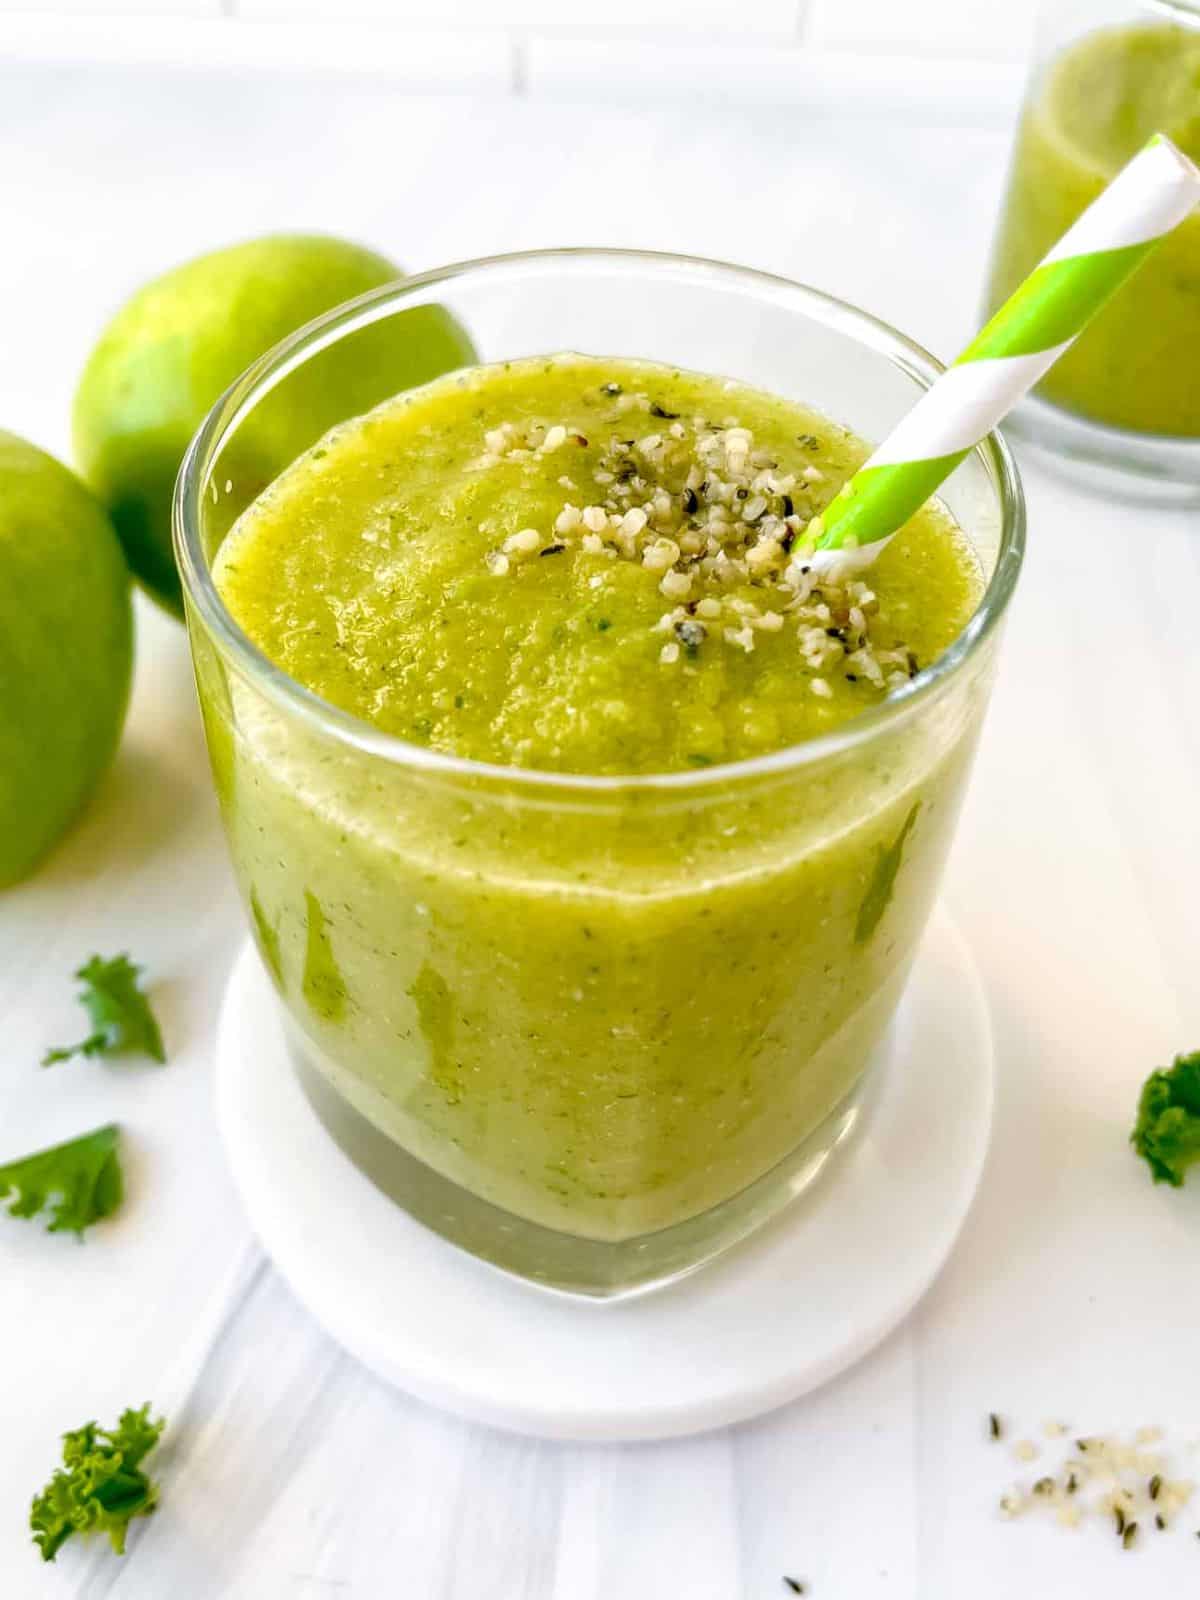 sour apple smoothie in a glass with a straw next to Granny Smith apples and kale leaves.